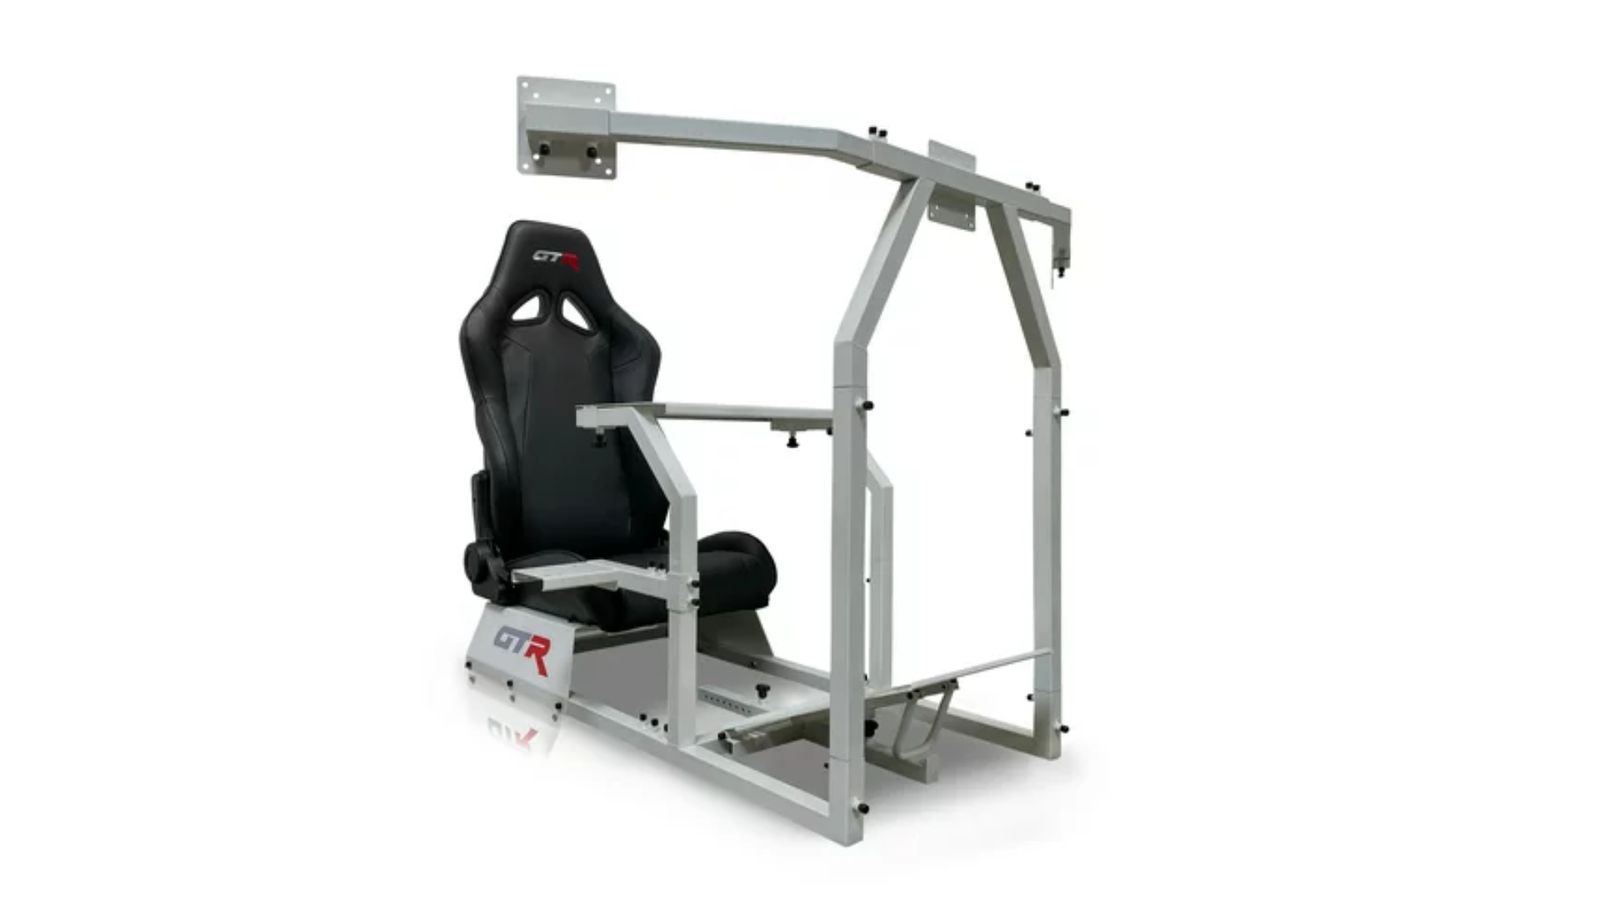 A black racing seat attached to a grey-coloured metal simulator frame featuring GTR branding on the side.